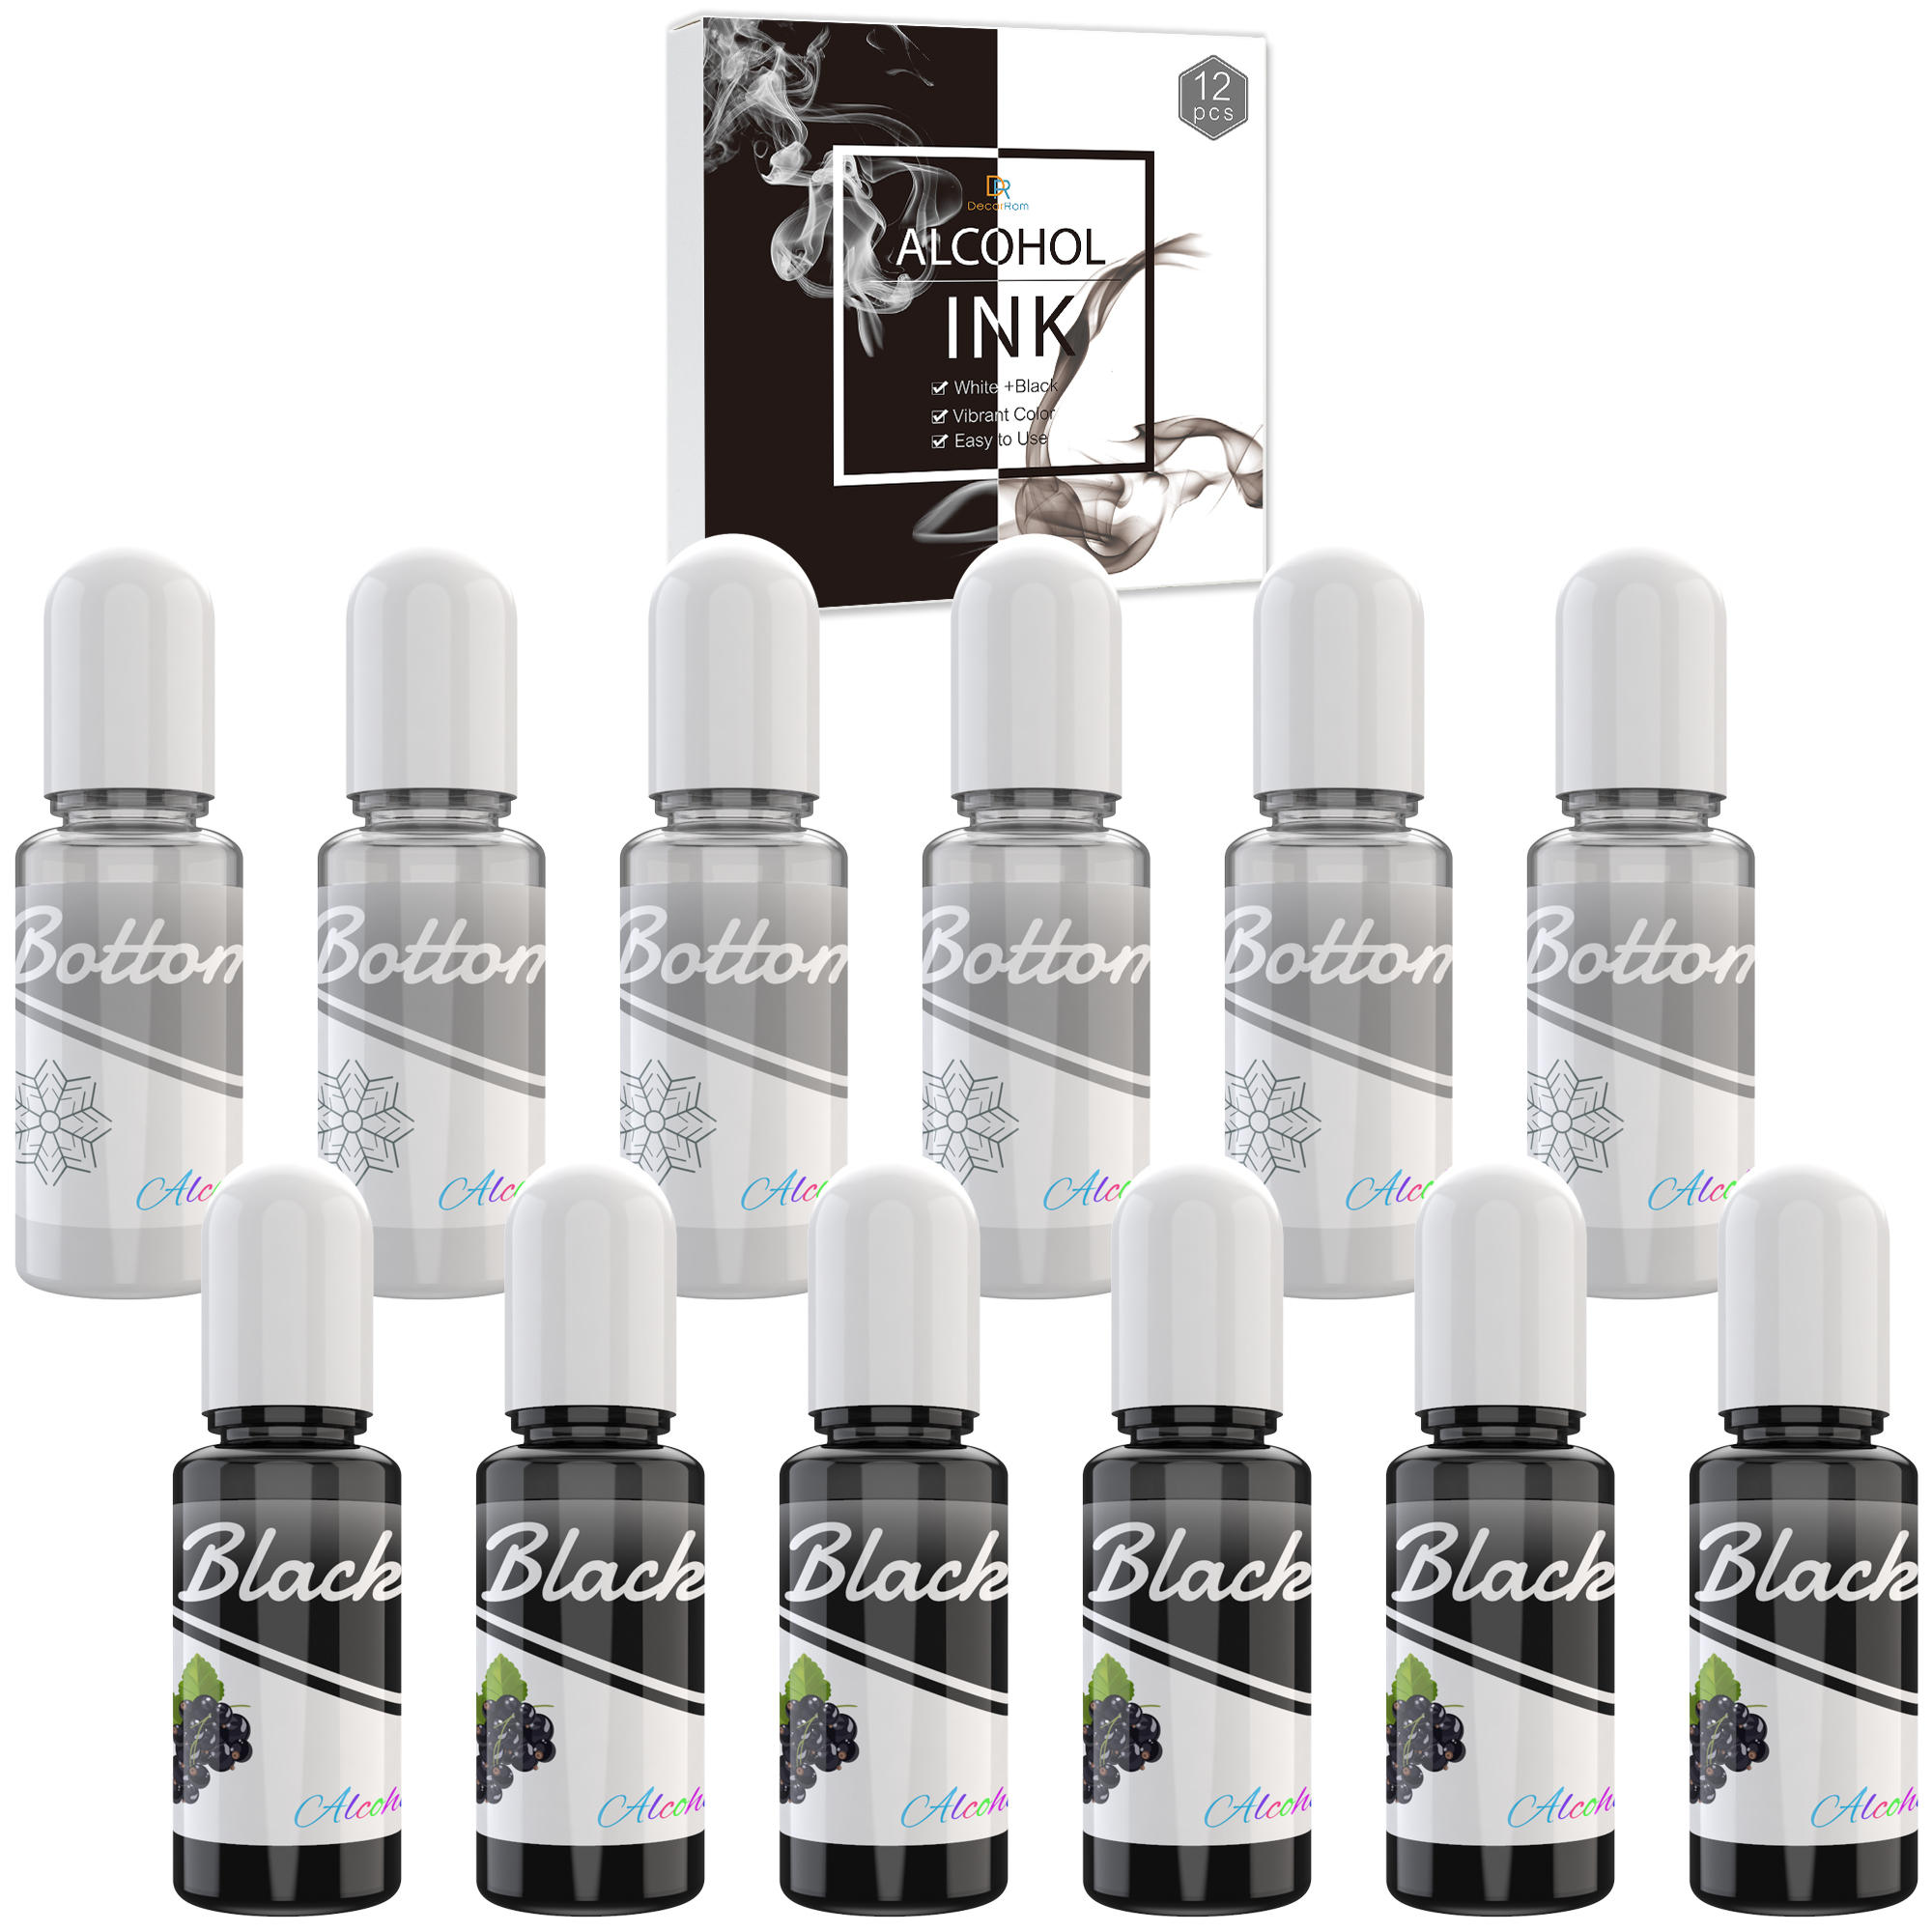 White & Black Alcohol Ink Set - 4 Ounce White and Black Alcohol-ba<x>sed Inks